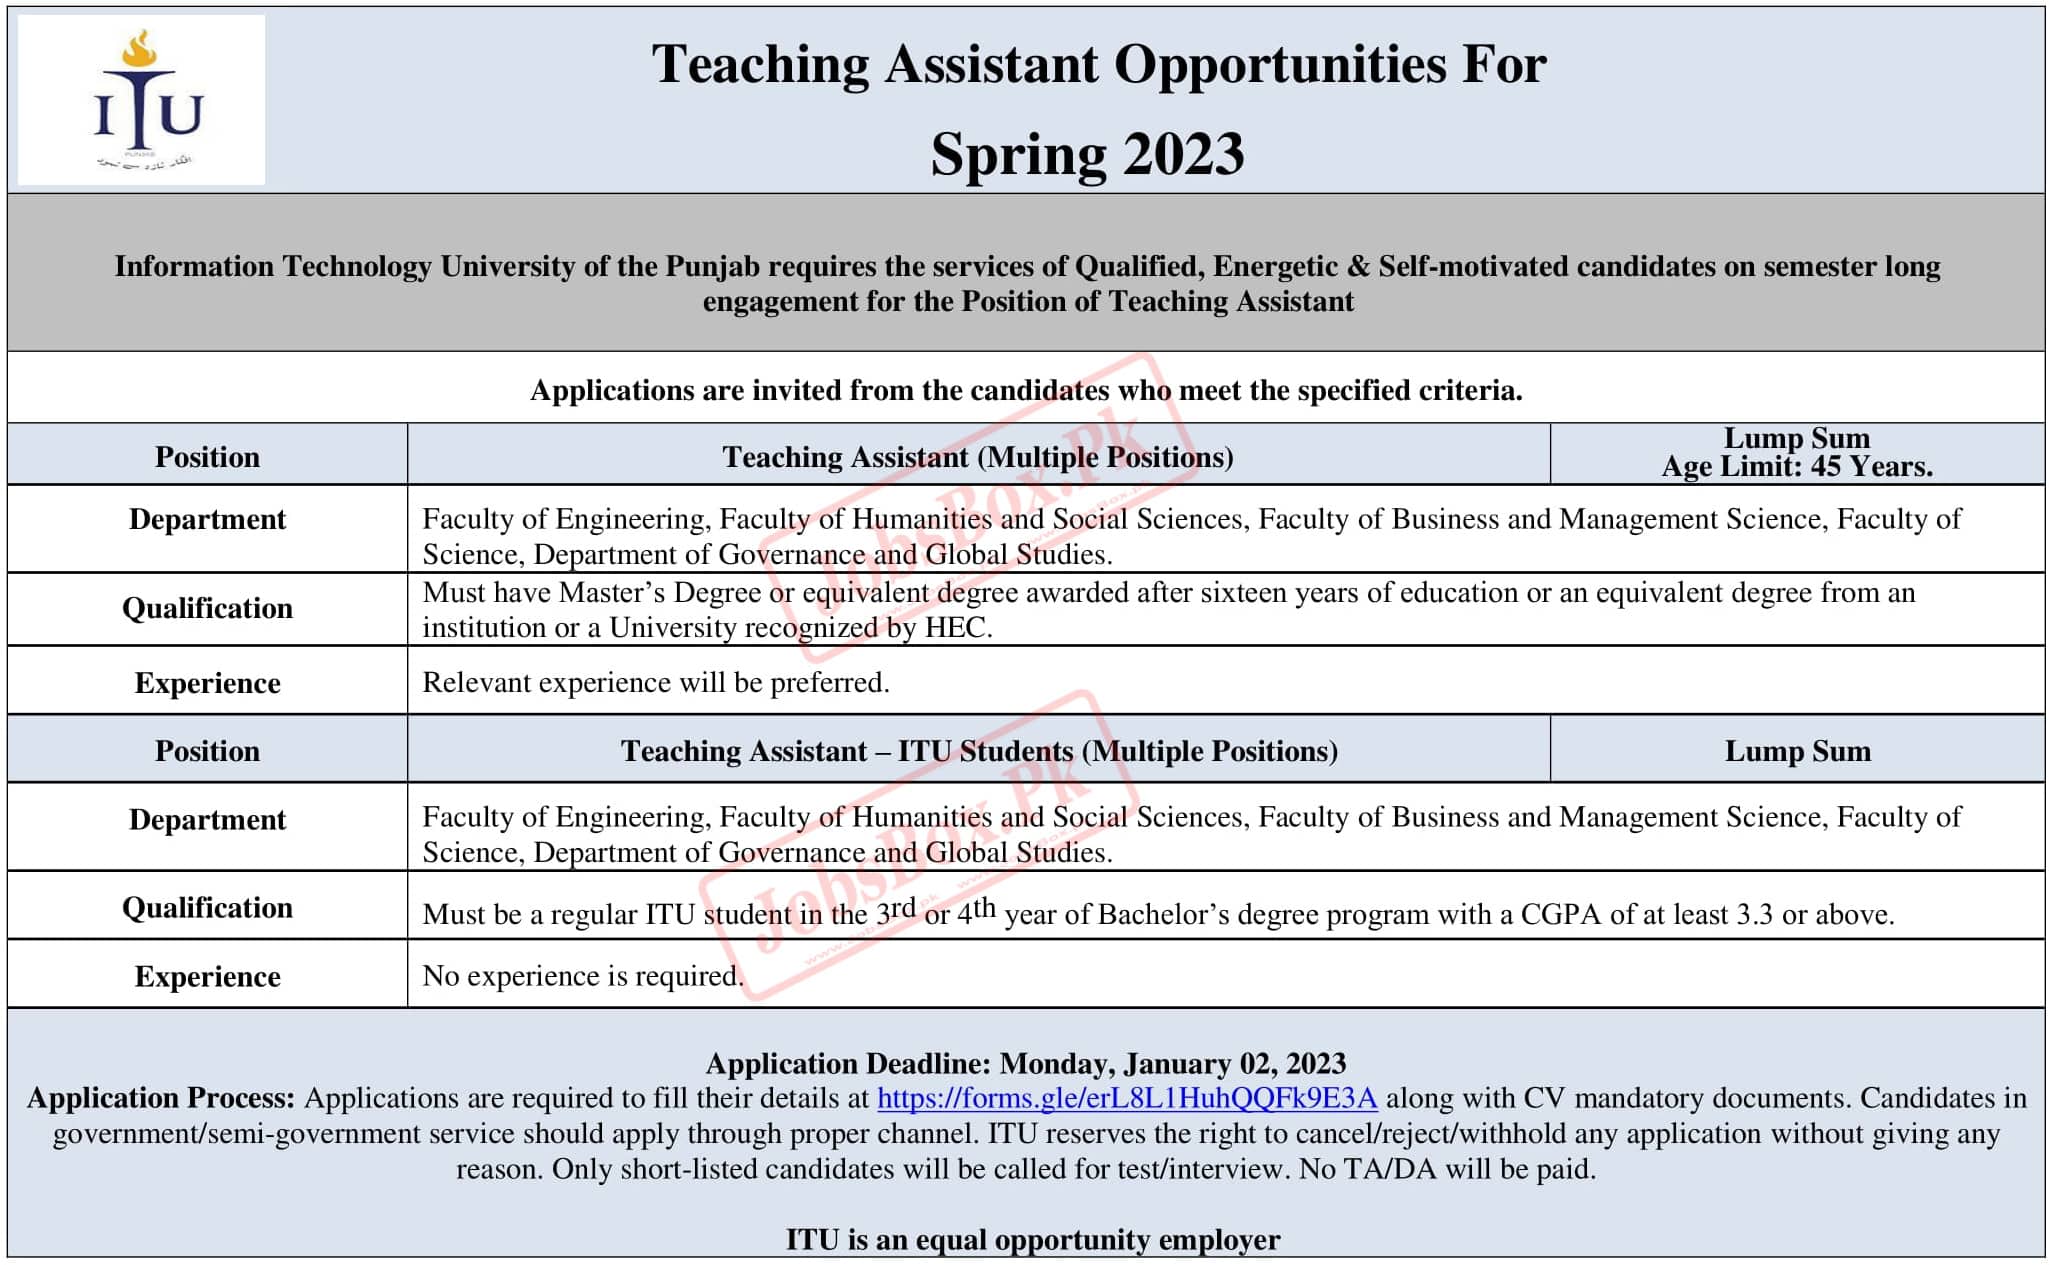 Teaching Assistant Opportunities for Spring 2023 at ITU Lahore